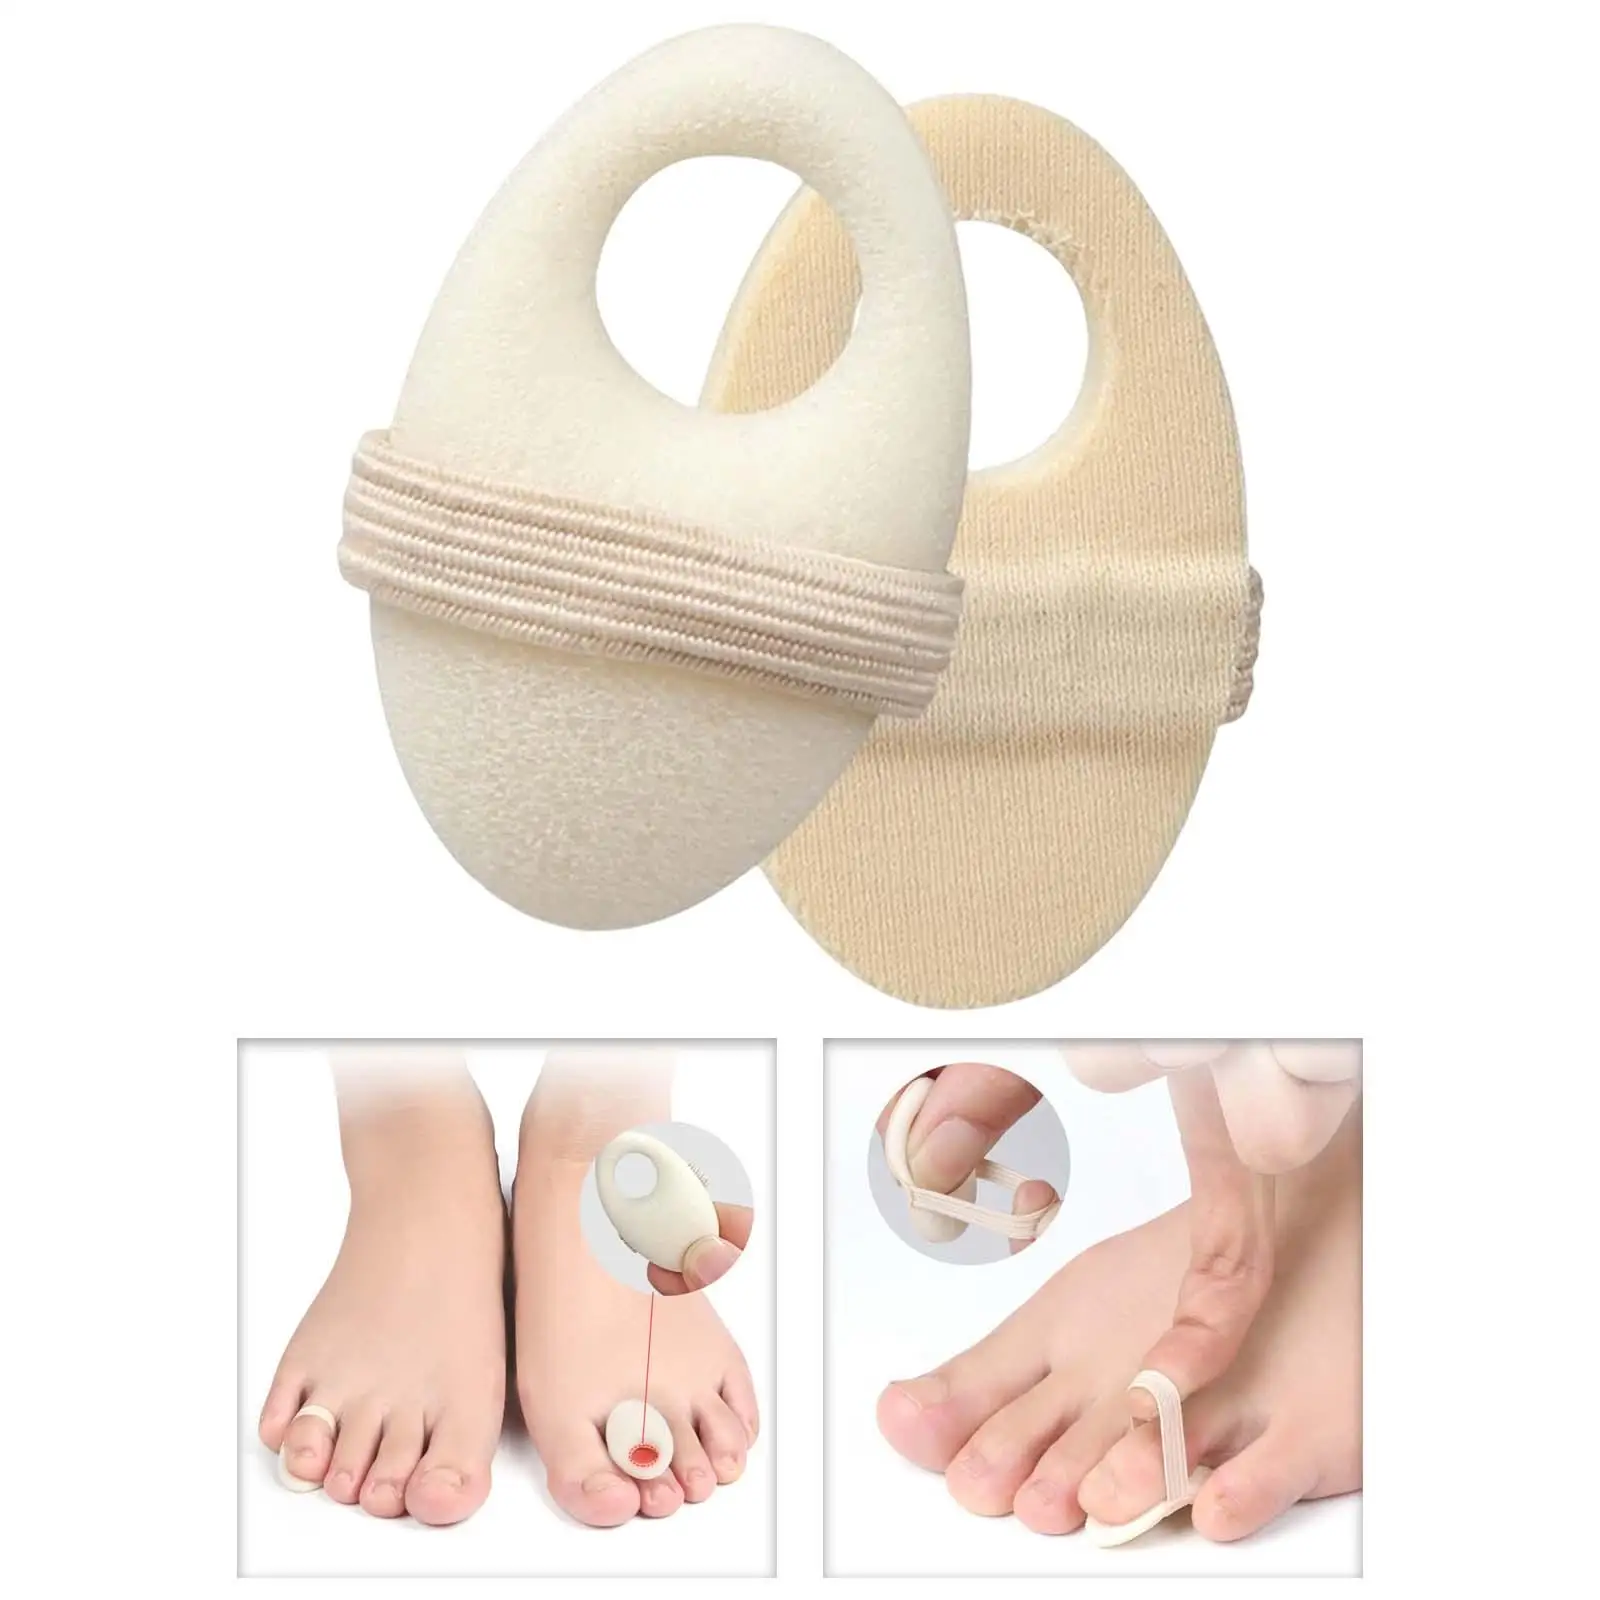 2 Pieces Foam Callus Cushions Waterproof 8mm Thick Wearable Metatarsal Foot Pads